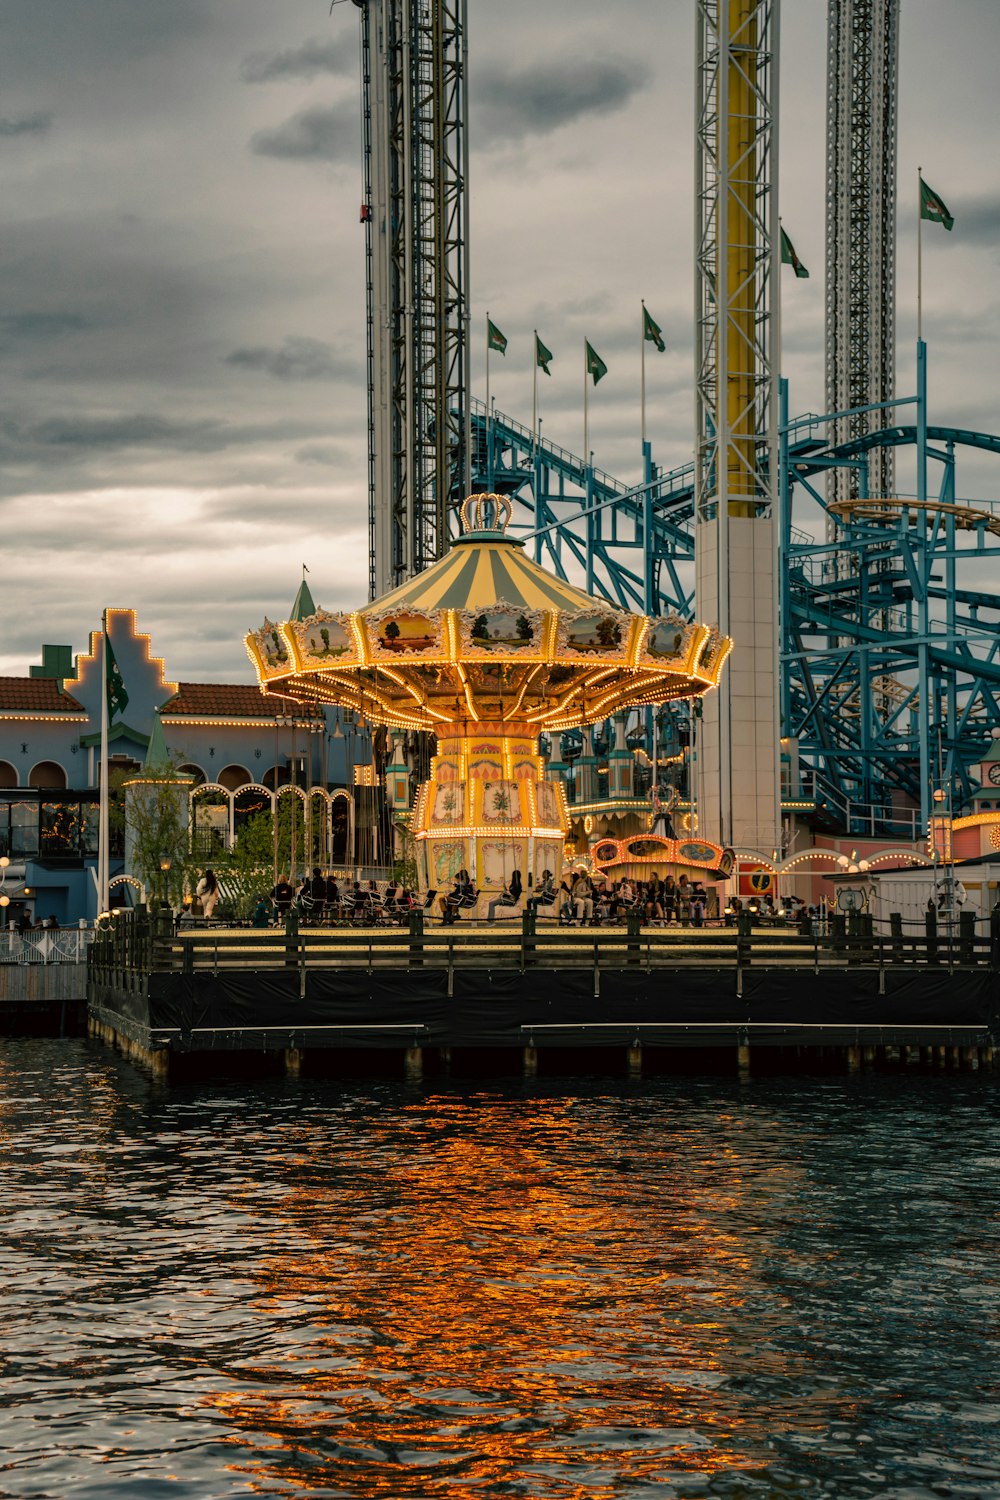 an amusement park with a carousel on the water